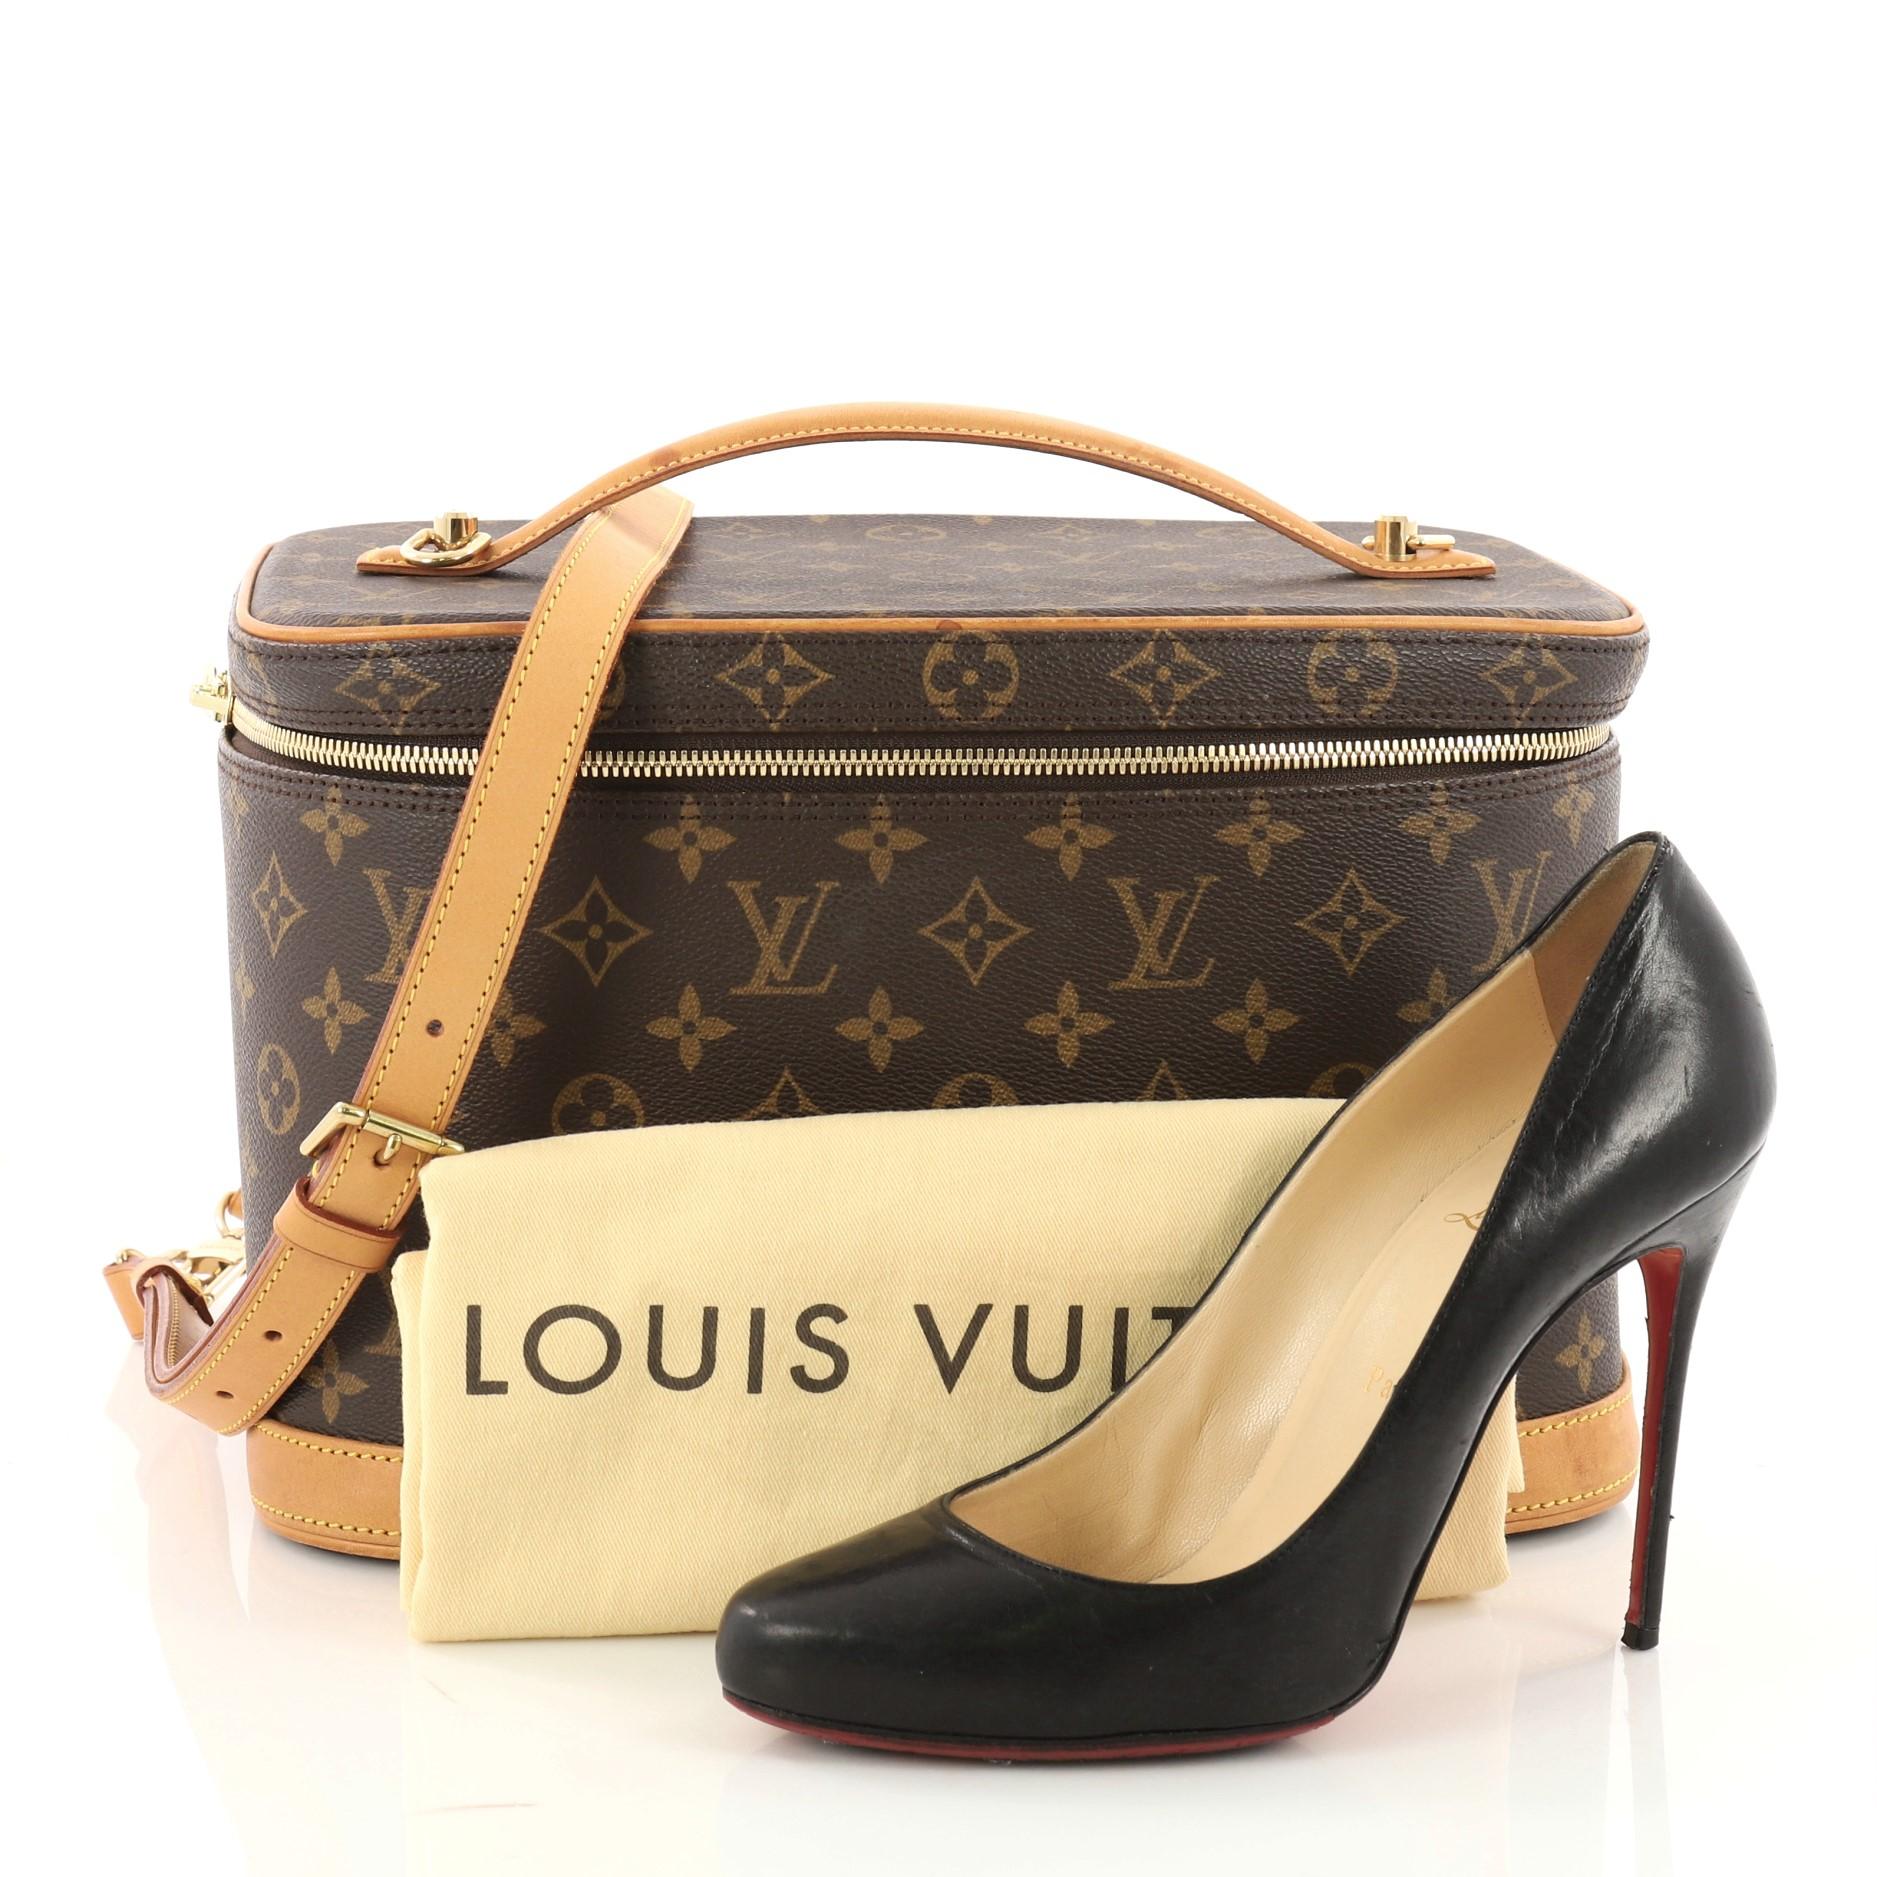 This authentic Louis Vuitton Nice Train Case Monogram Canvas is a perfect travel companion for an on-the-go fashionista. Crafted from brown monogram coated canvas, this boxy travel bag features vachetta leather flat handle and trims and gold-tone